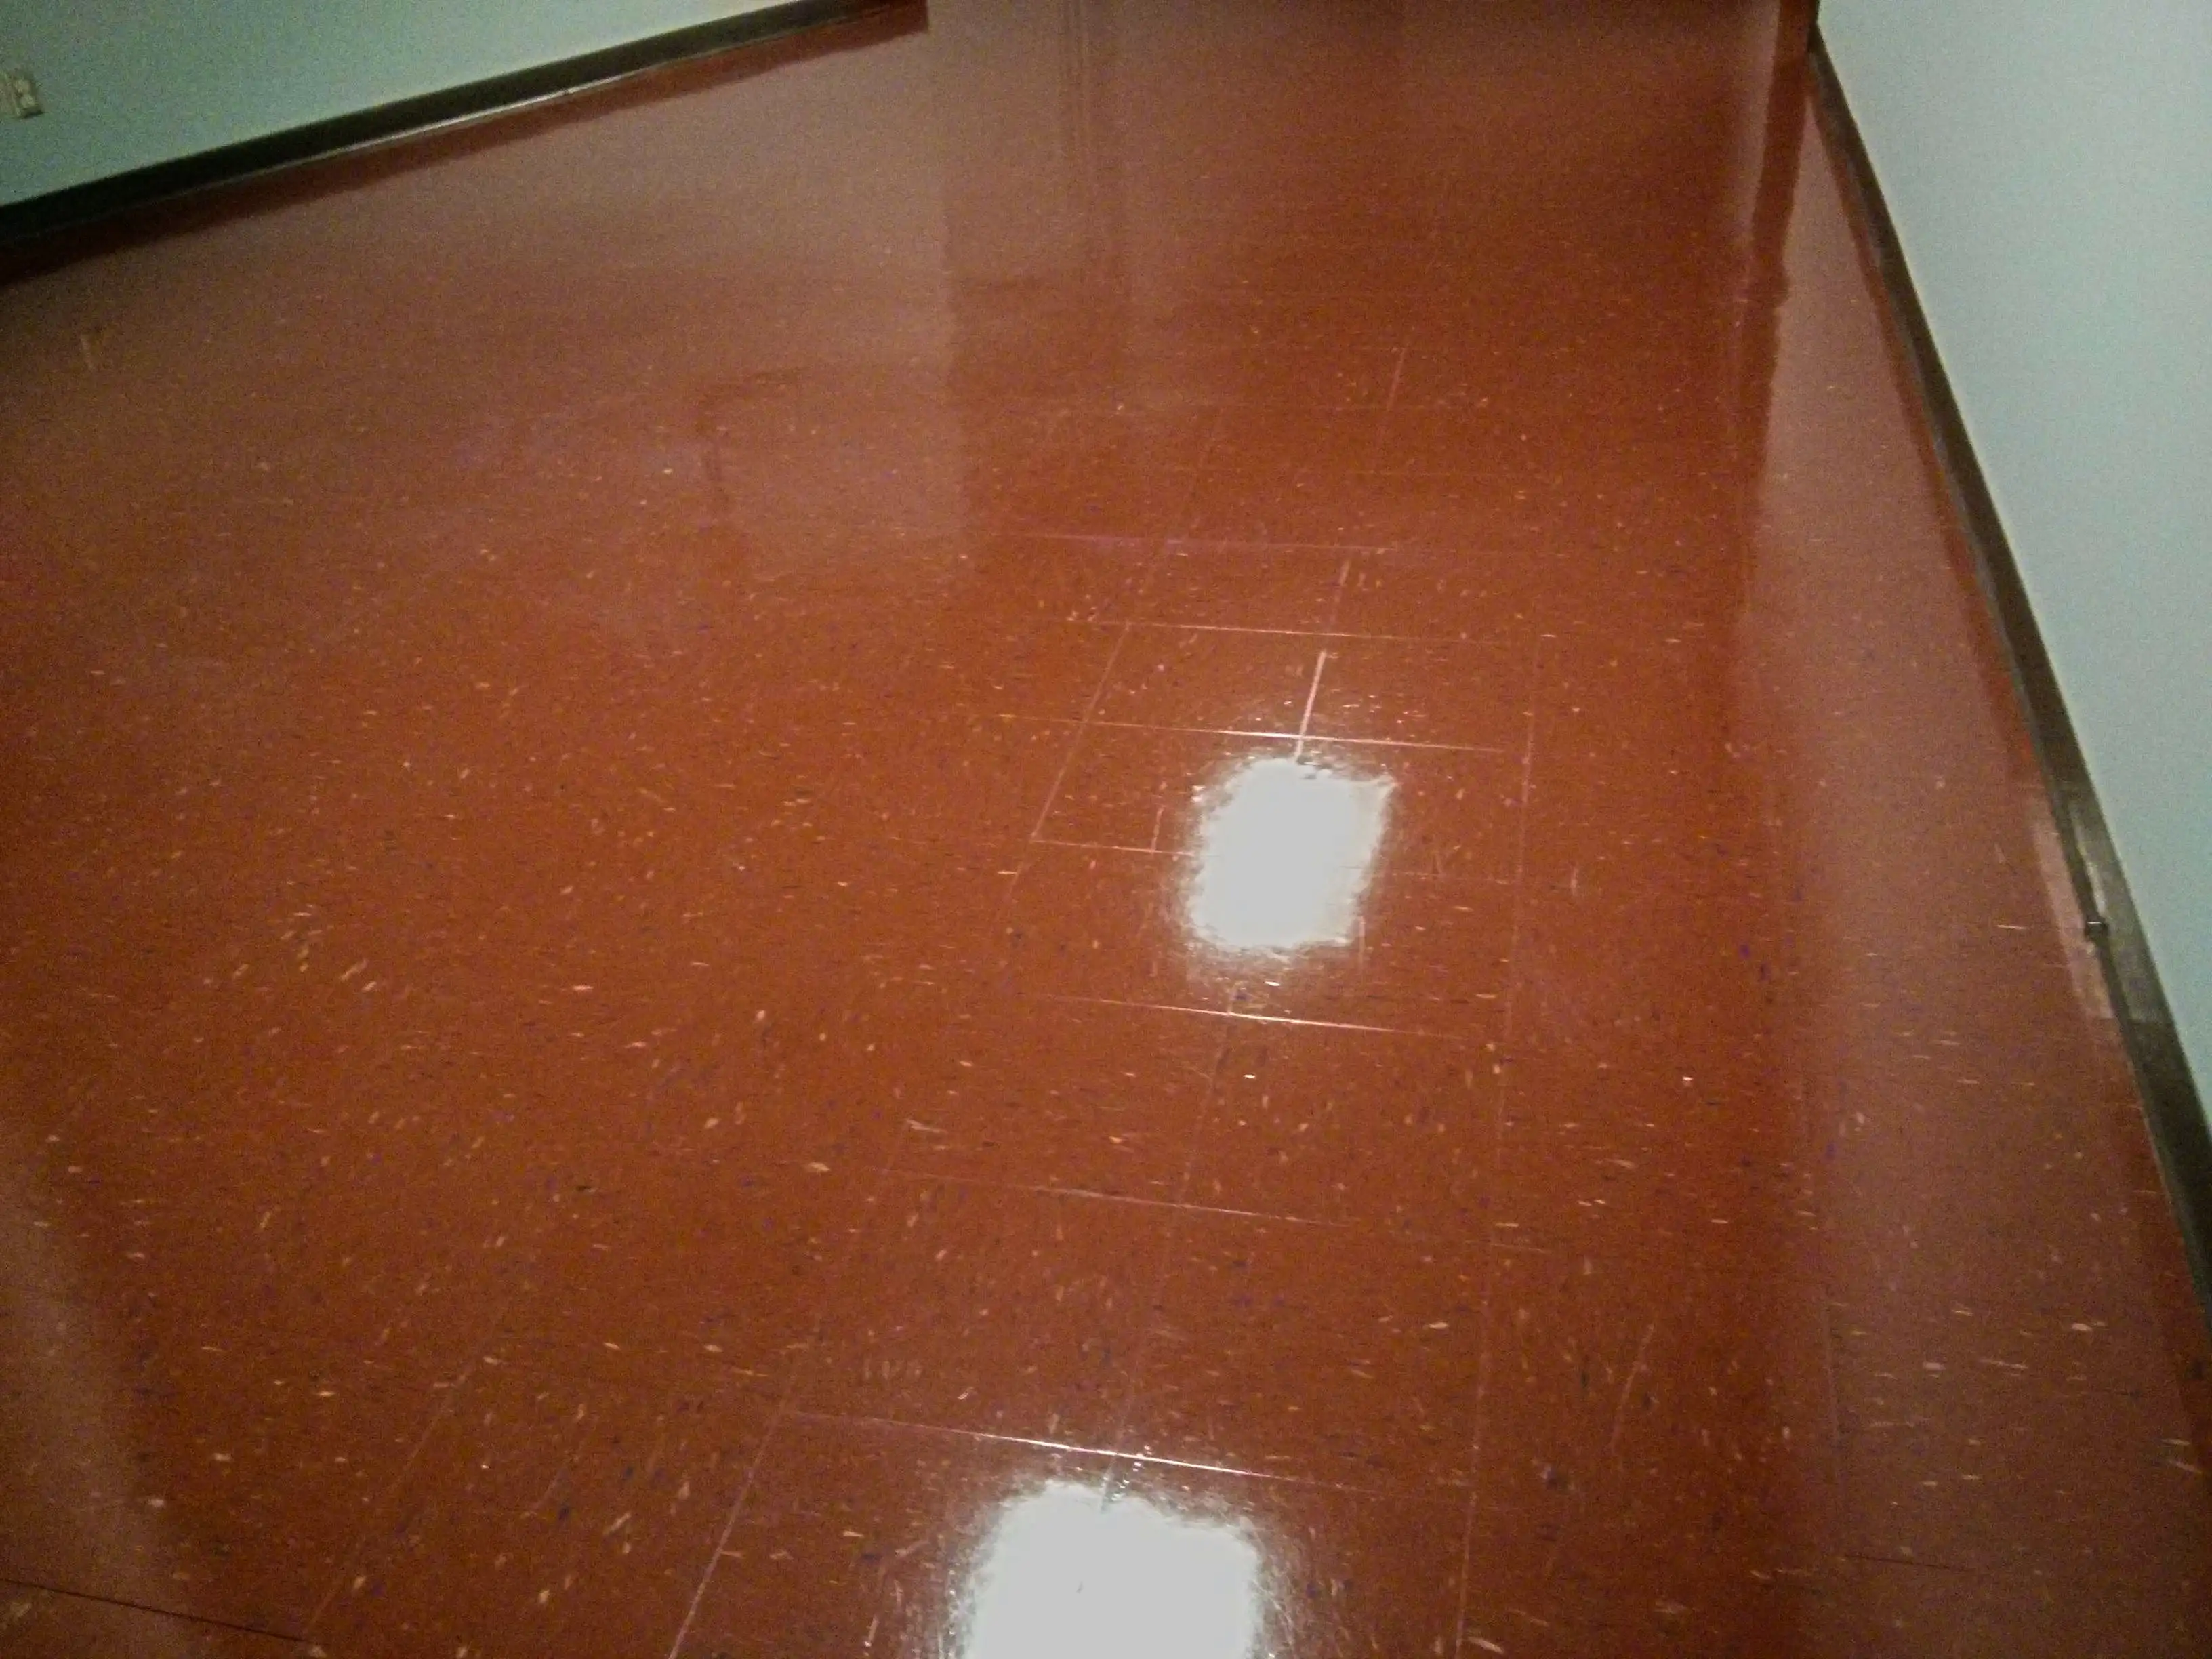 old-vct-tile-floor-in-burnsville-mn-deep-scrub-and-re-coat-with-mid-solids-high-gloss-floor-finish